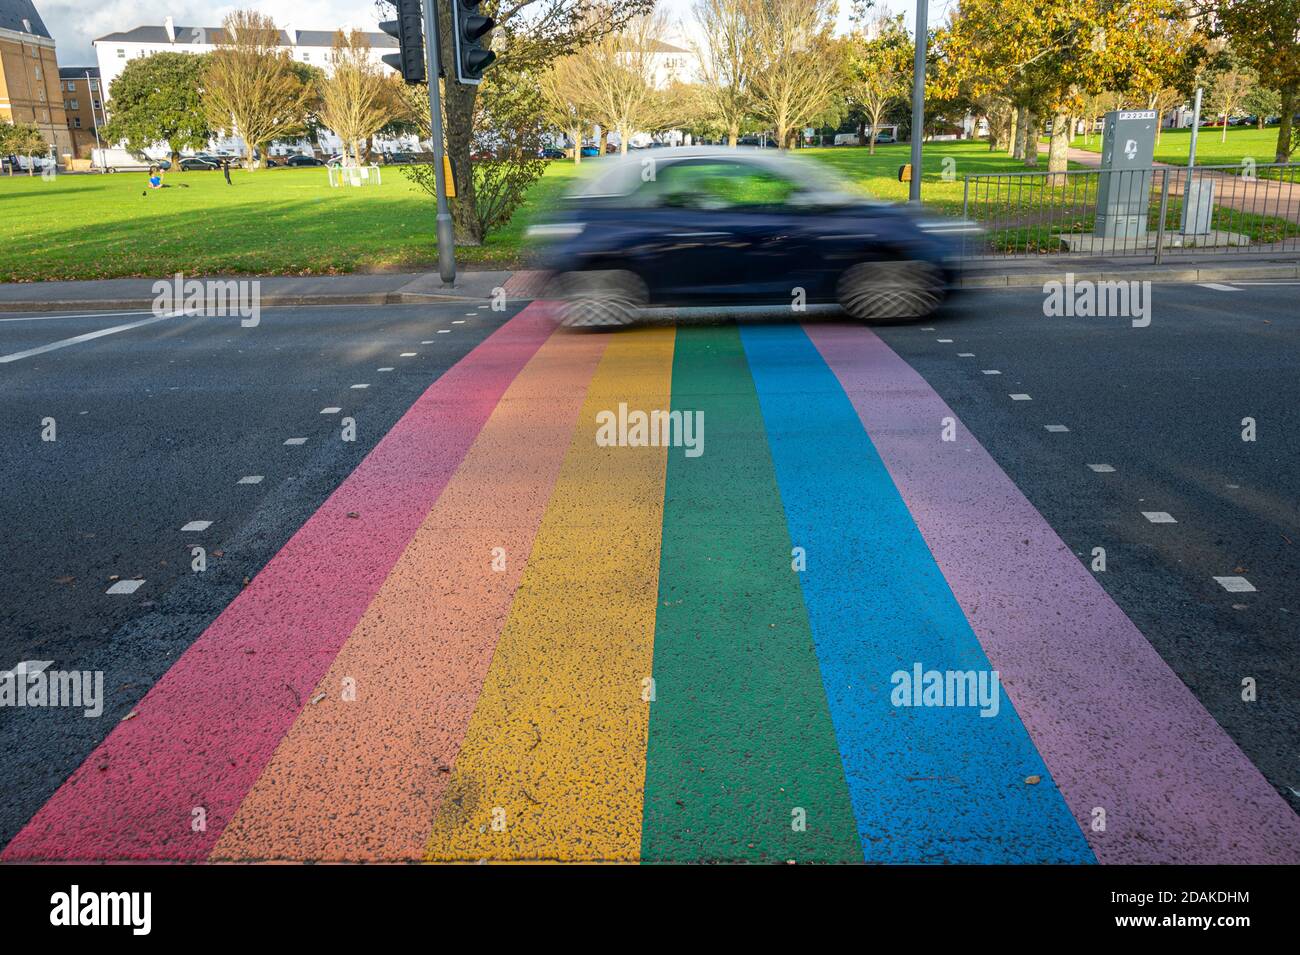 Rainbow Road Crossing during COVID-19 in support of key workers and the NHS Stock Photo